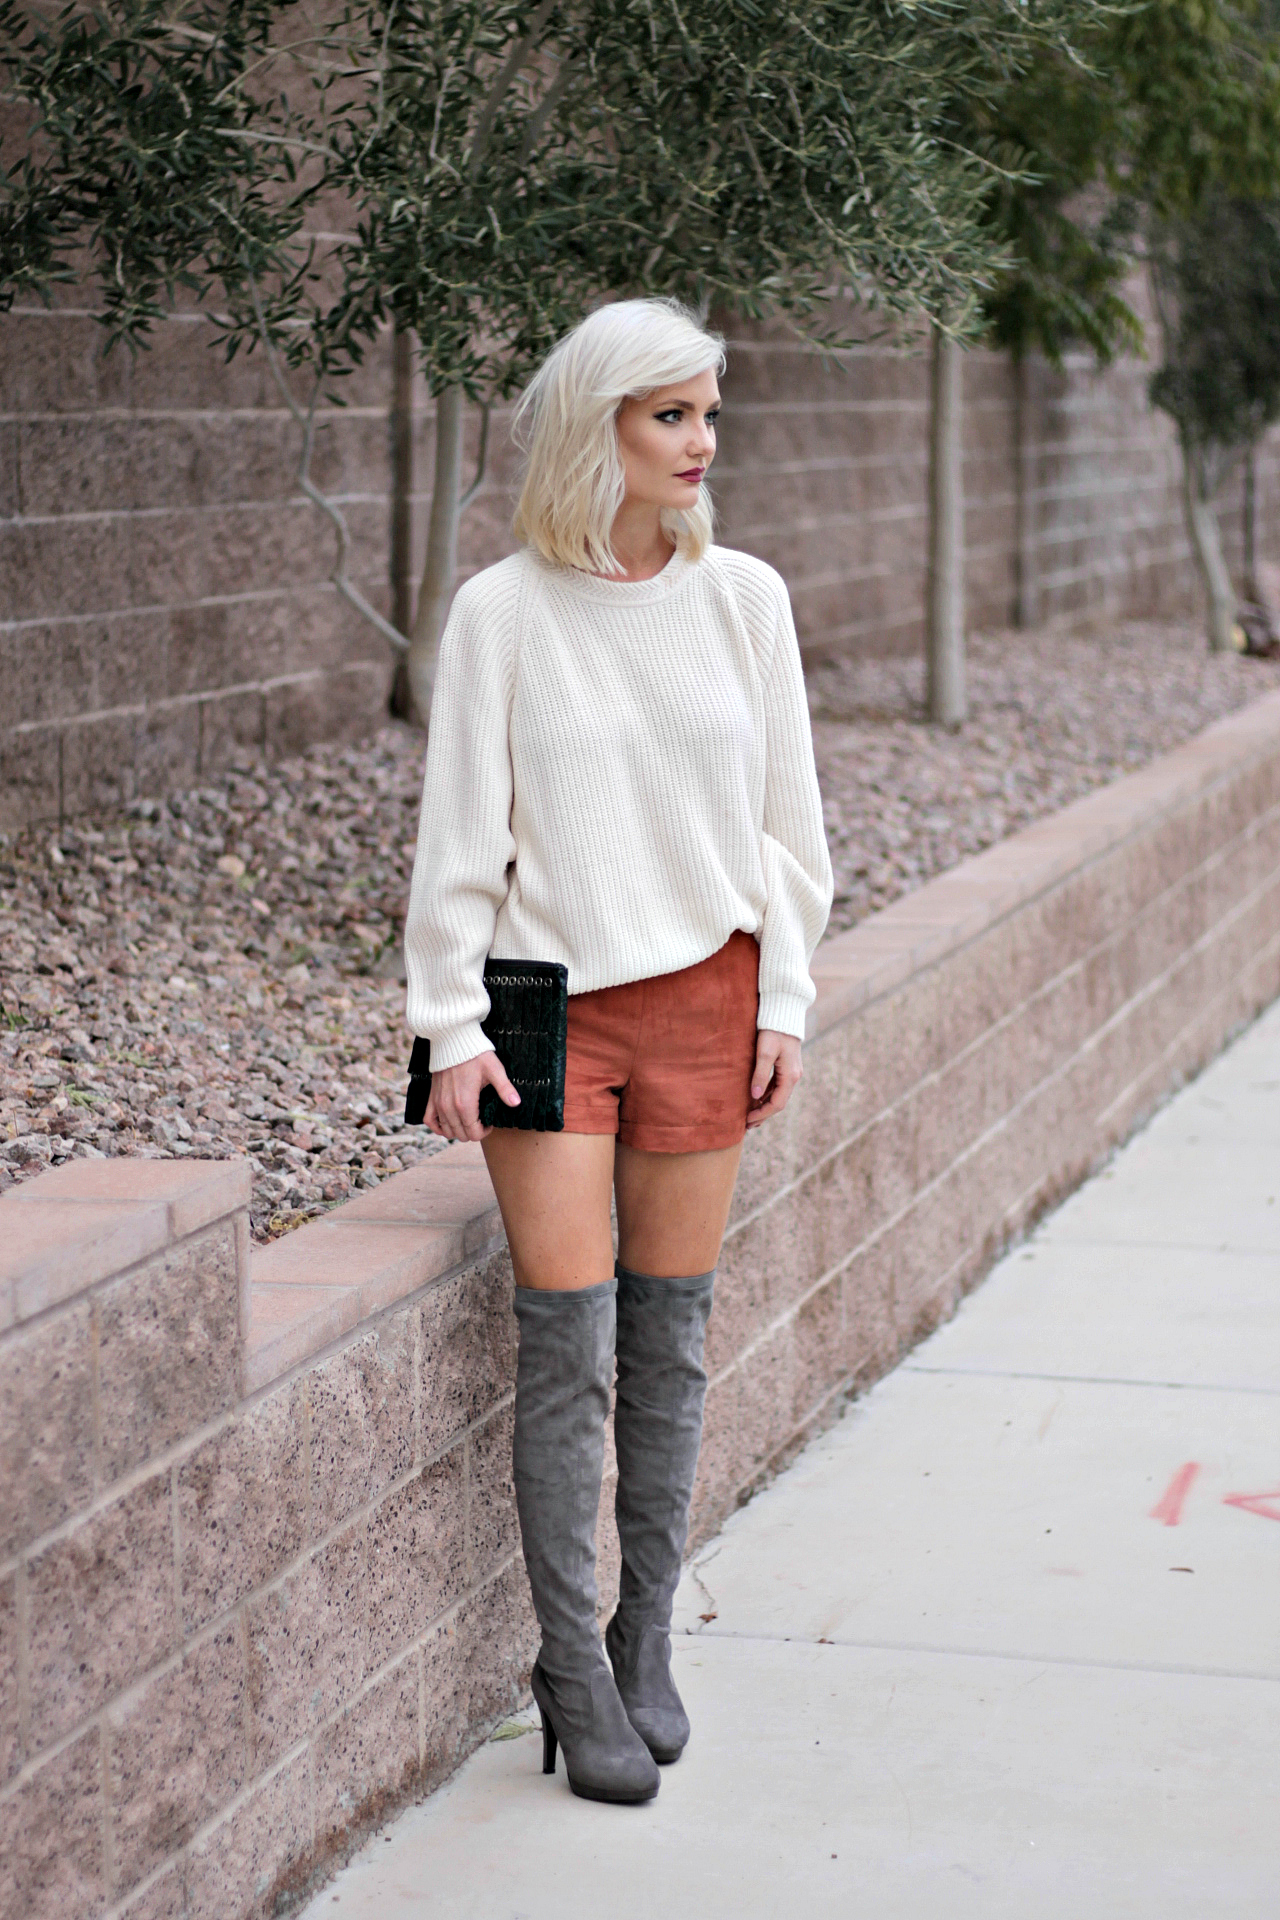 How To Wear Over The Knee Boots - The 